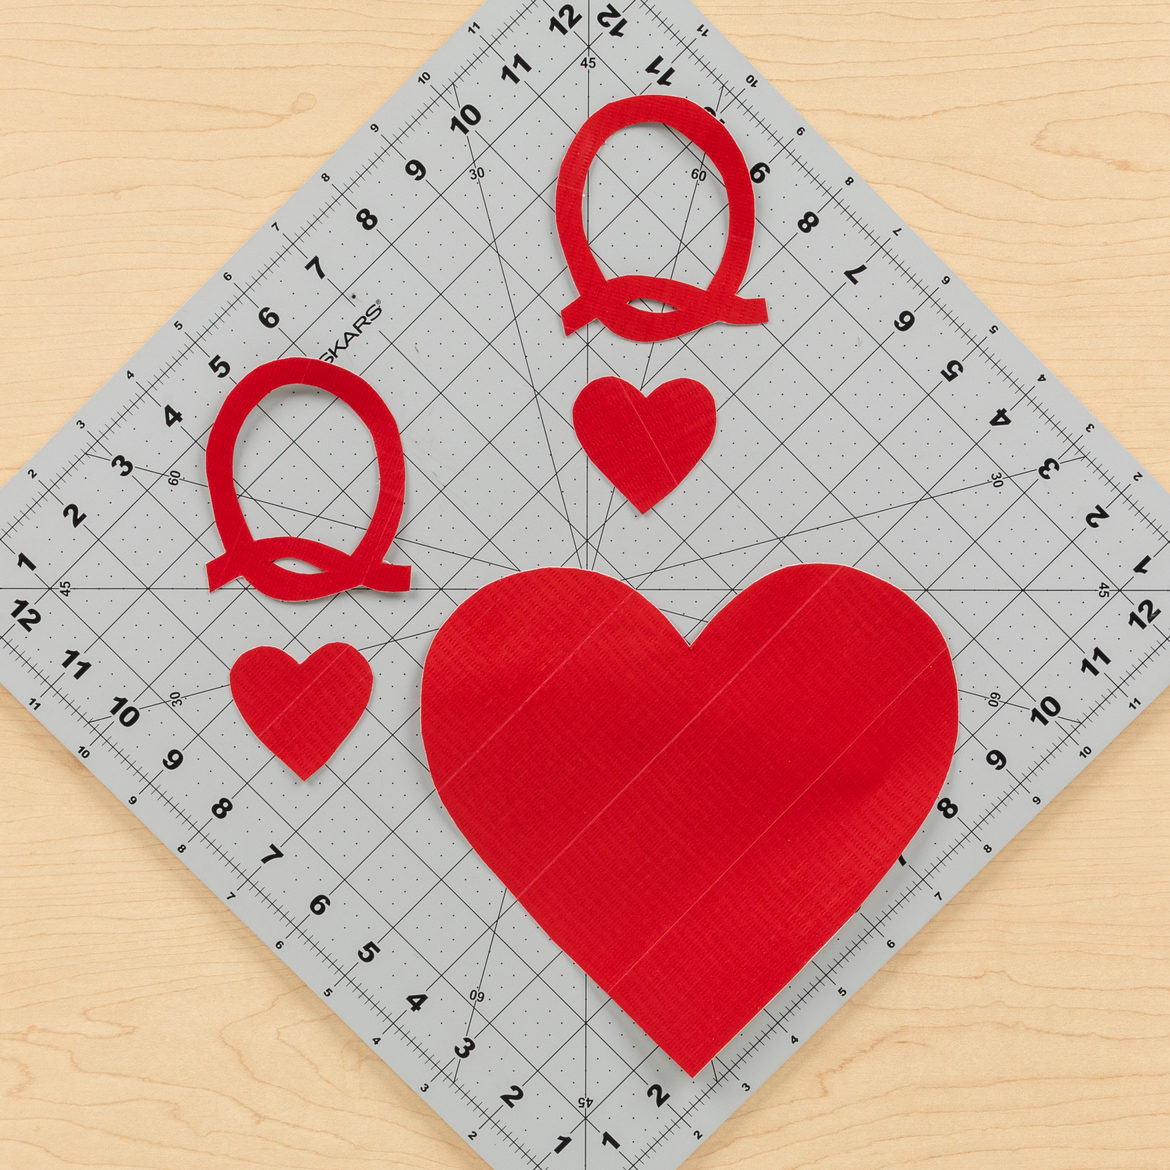 2 Qs, 2 small hearts and one large heart cut out of a red Duck Tape fabric sheet